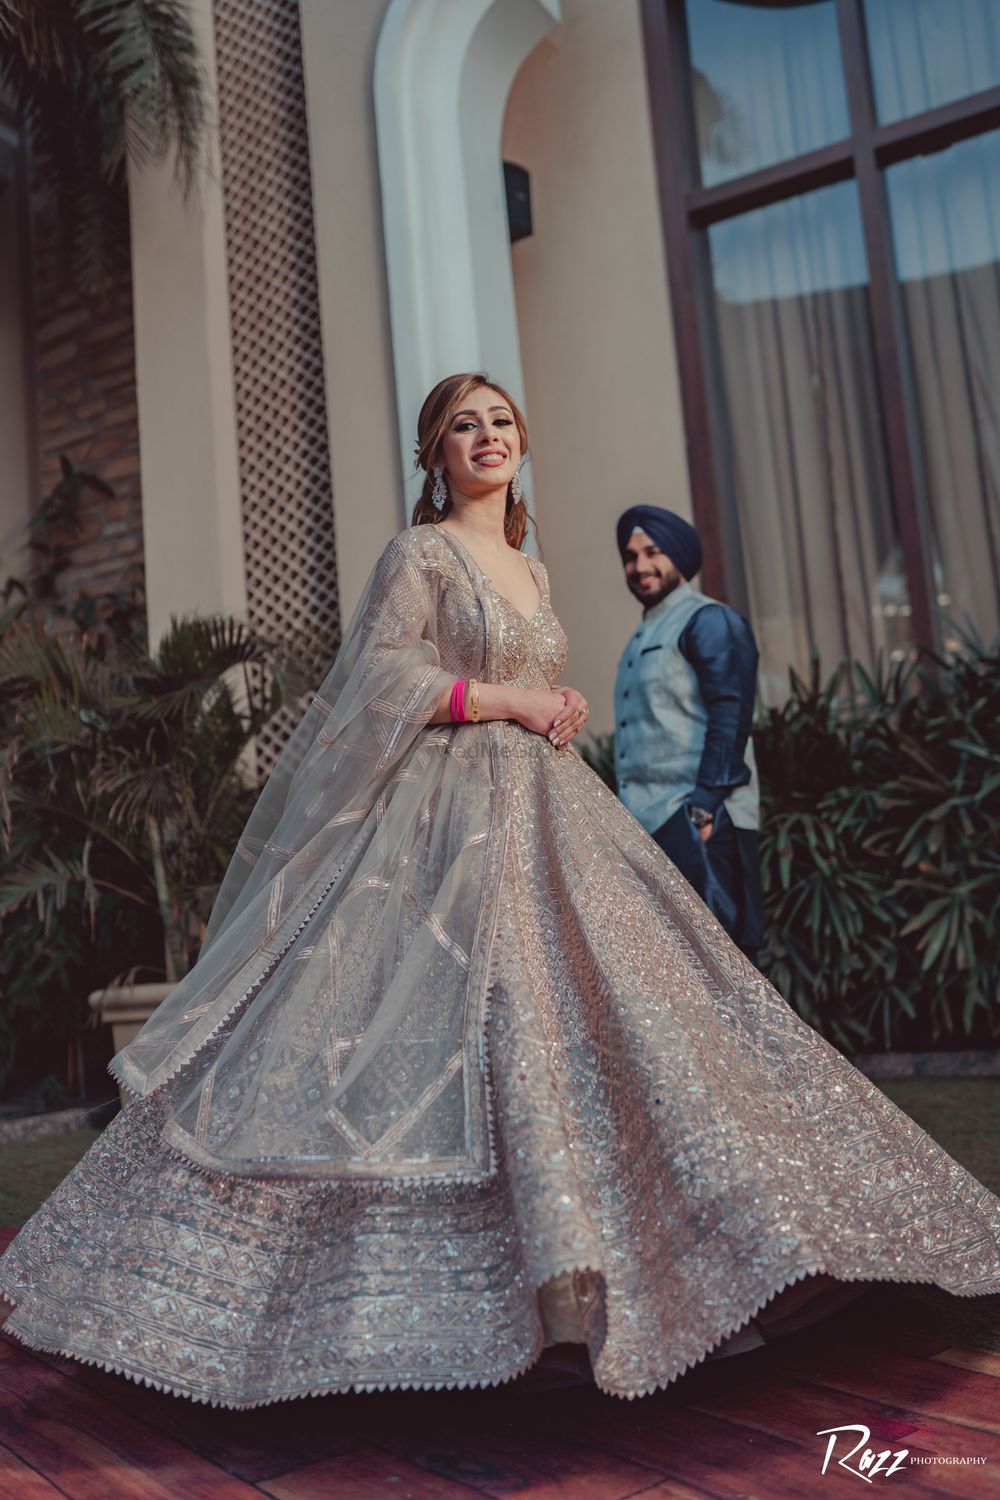 Photo of Bride twirling in silver lehenga.